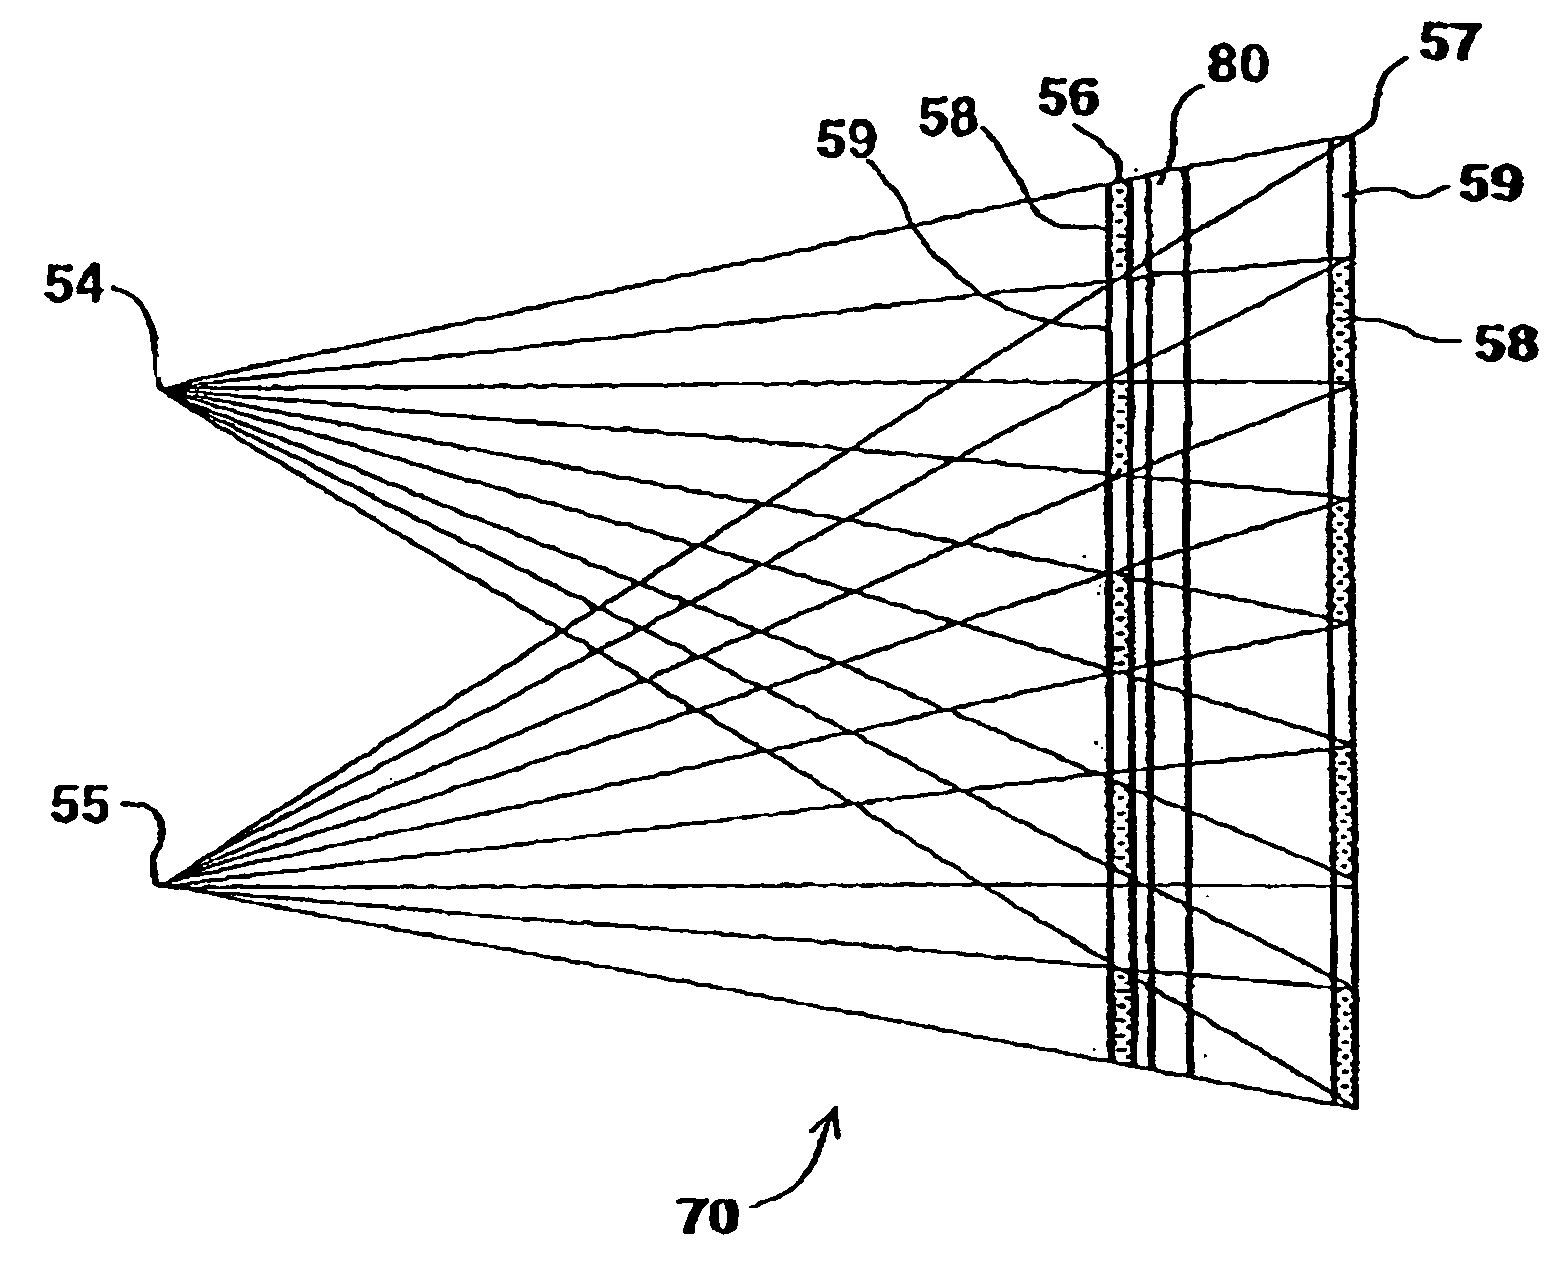 Systems for three-dimensional viewing and projection